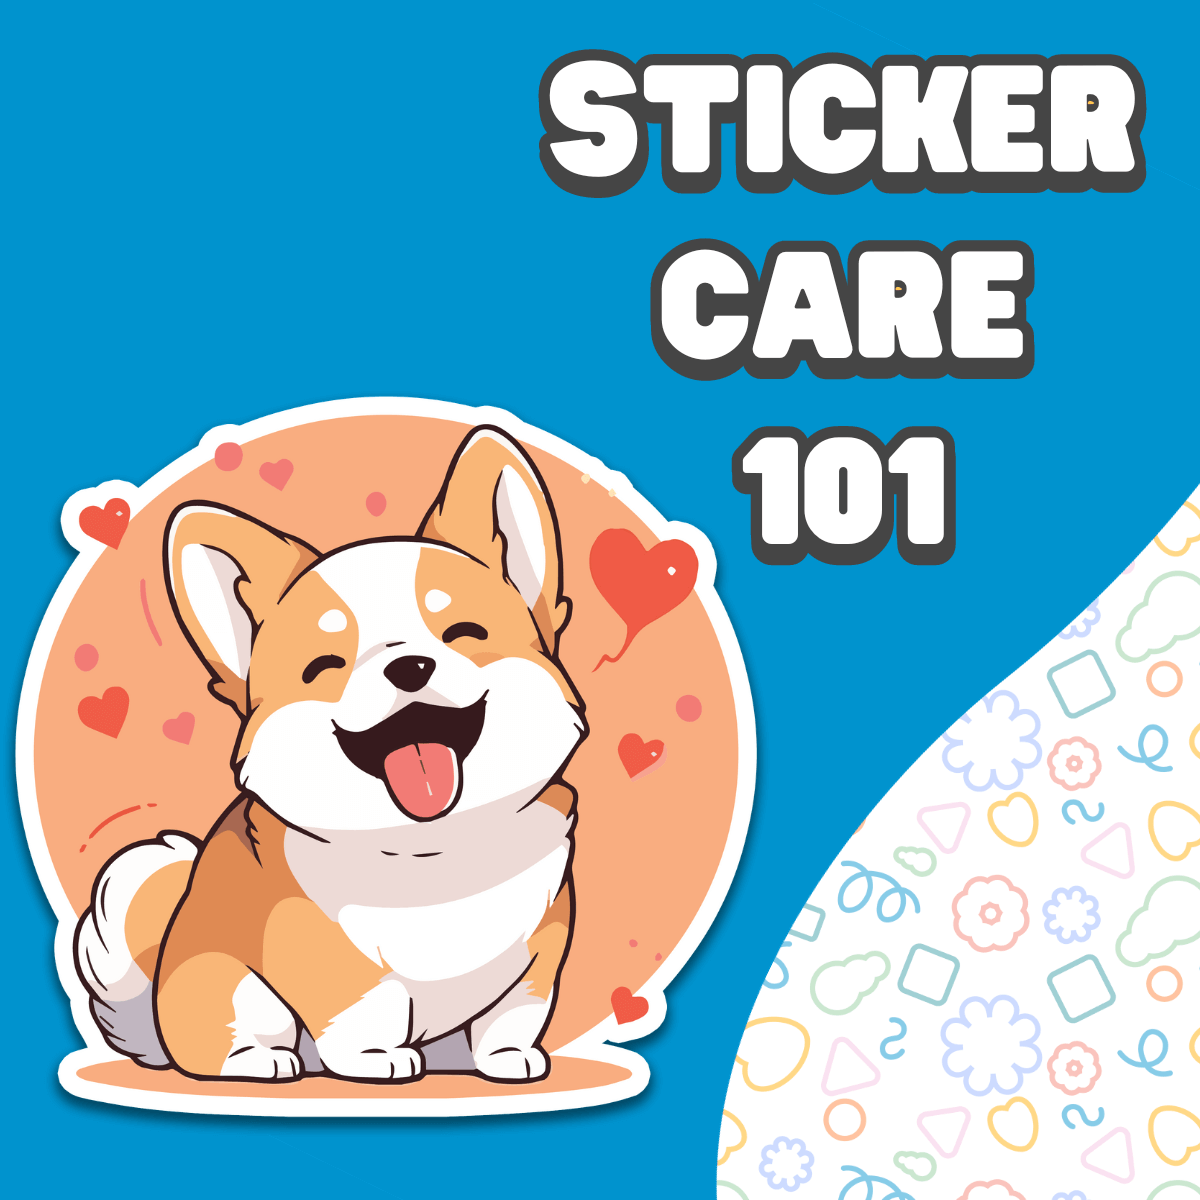 Sticker Care 101 - Keep Your Stickers Sassy, Not Saggy